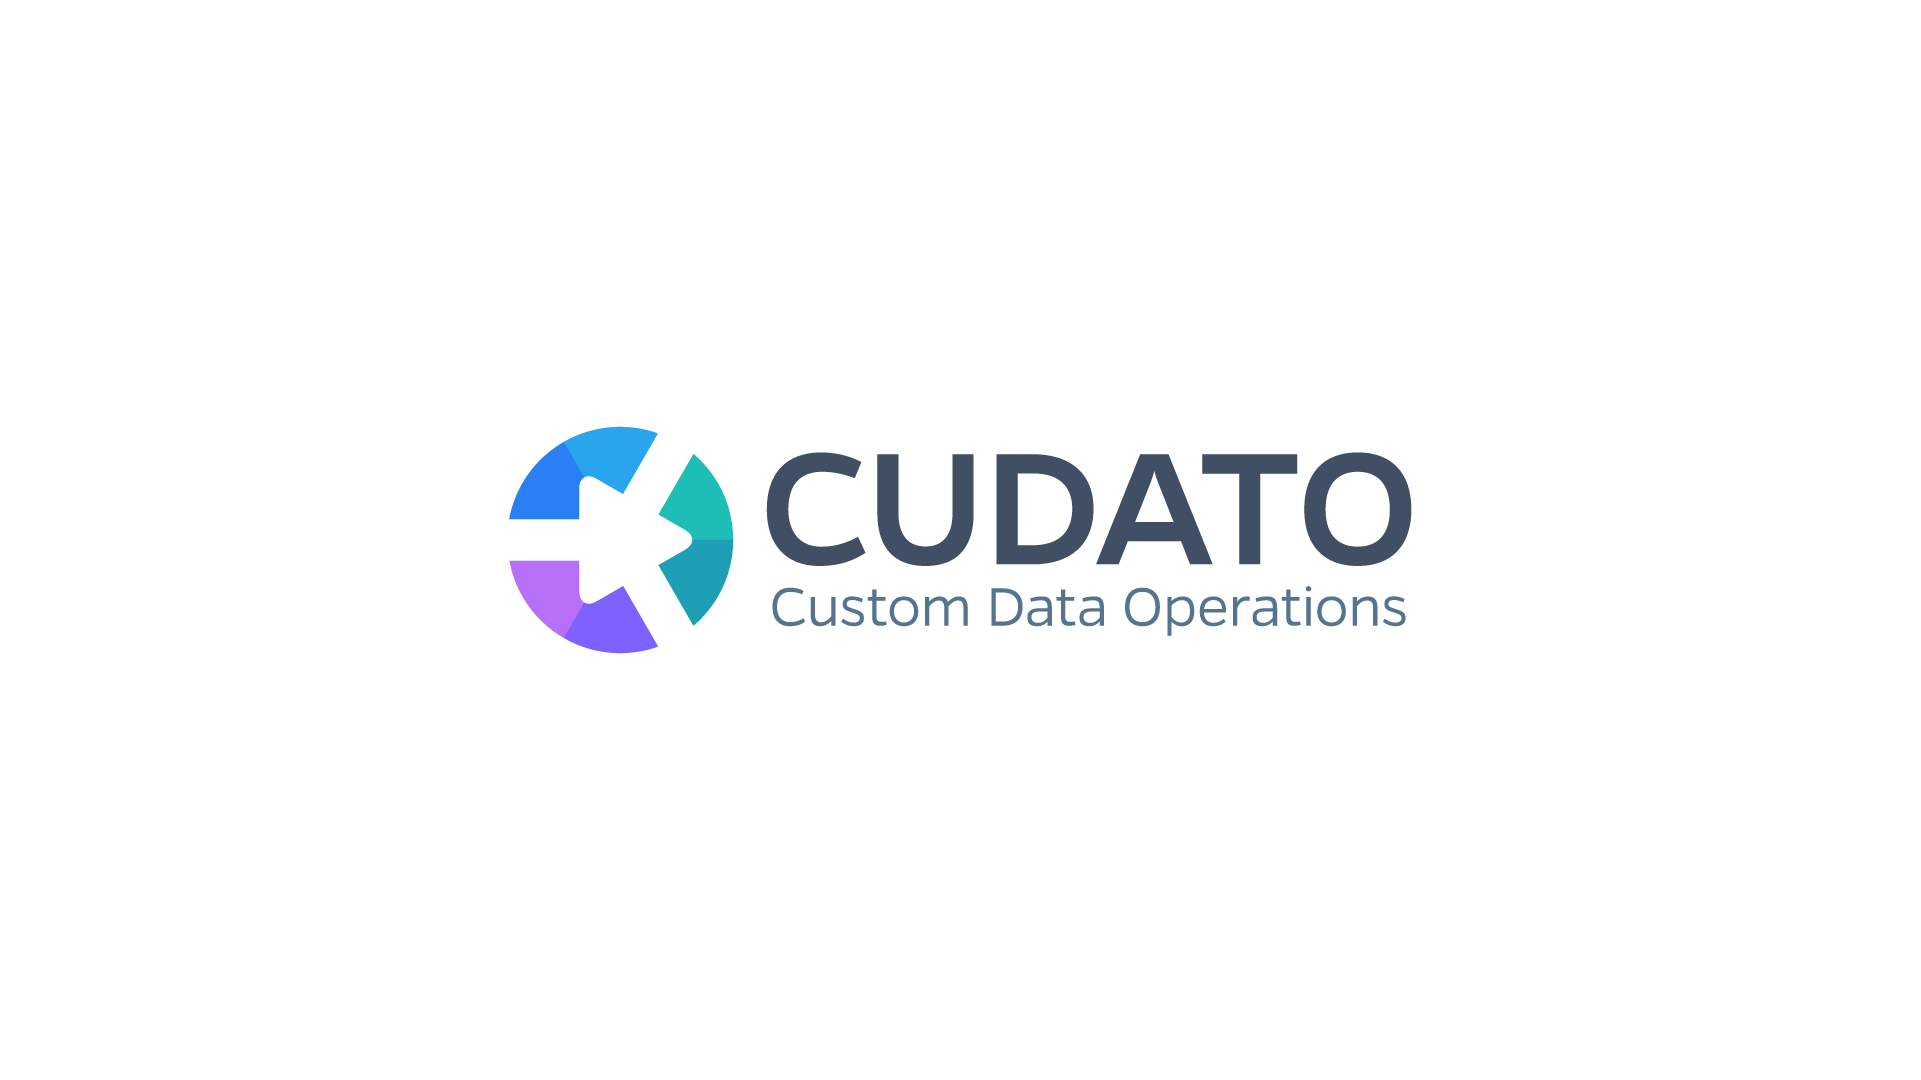 CUDATO - Software Automation Technology logo, circle with three arrows inside, symbolizing automation and technological efficiency